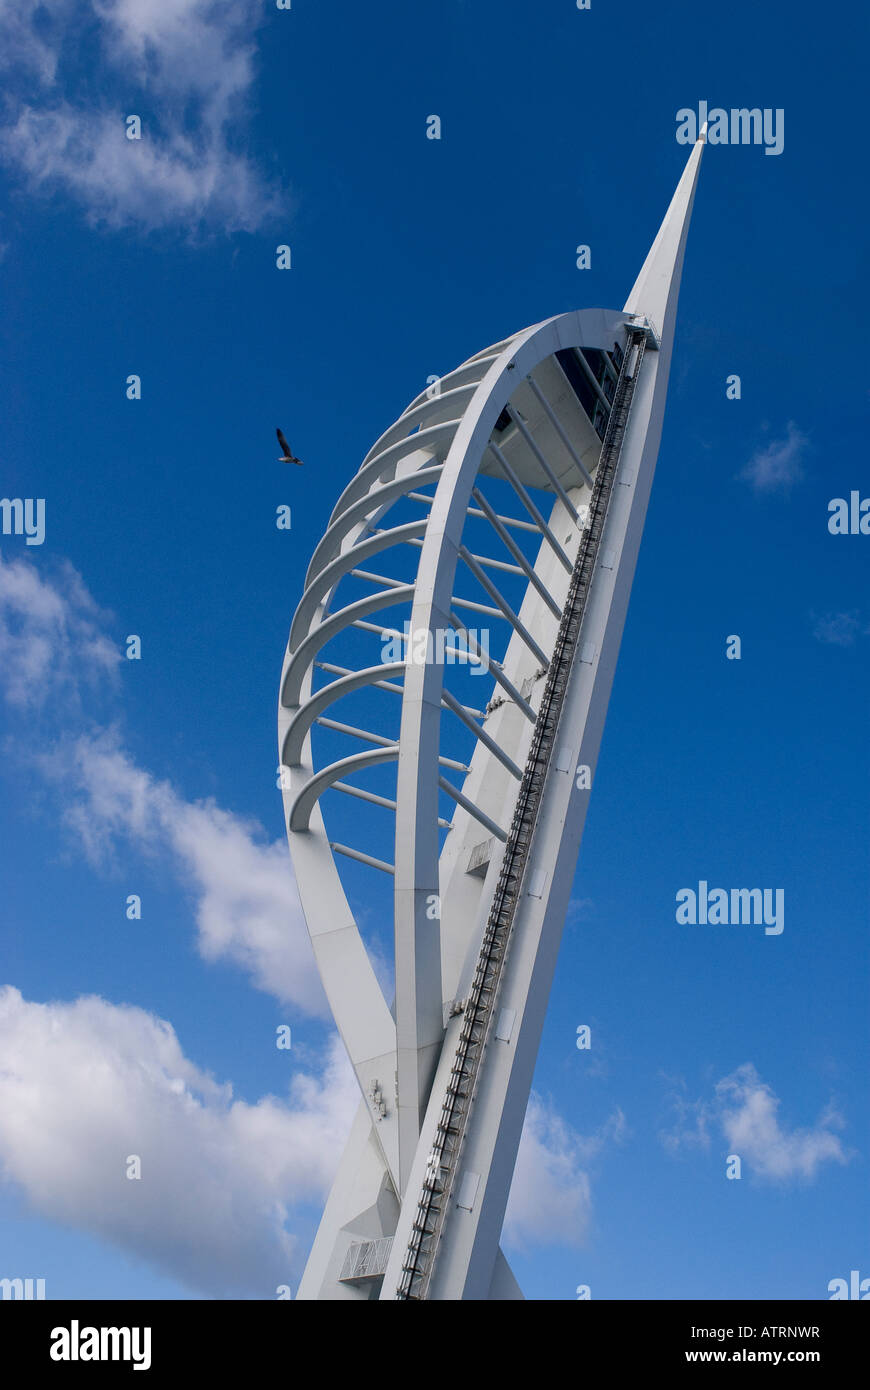 Spinnaker Tower overlooking Porstmouth harbour, southern England Stock Photo